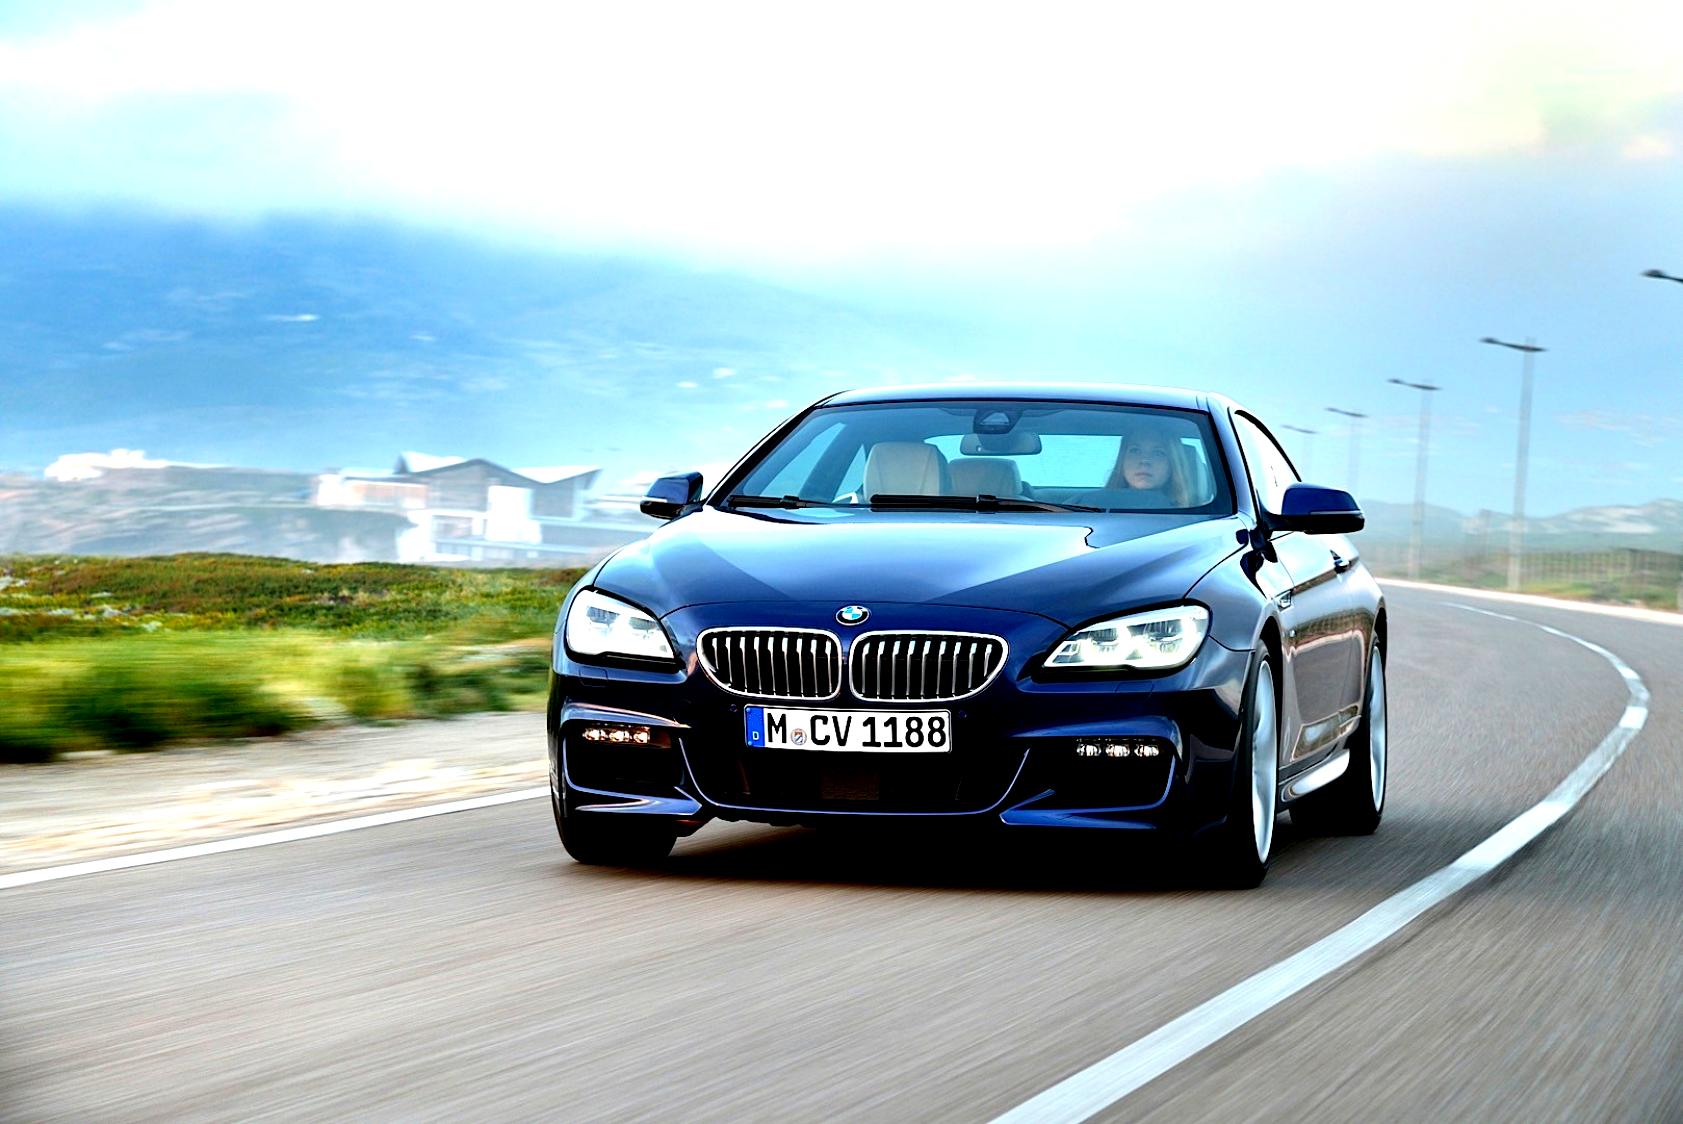 BMW 6 Series Coupe F13 2011 #12